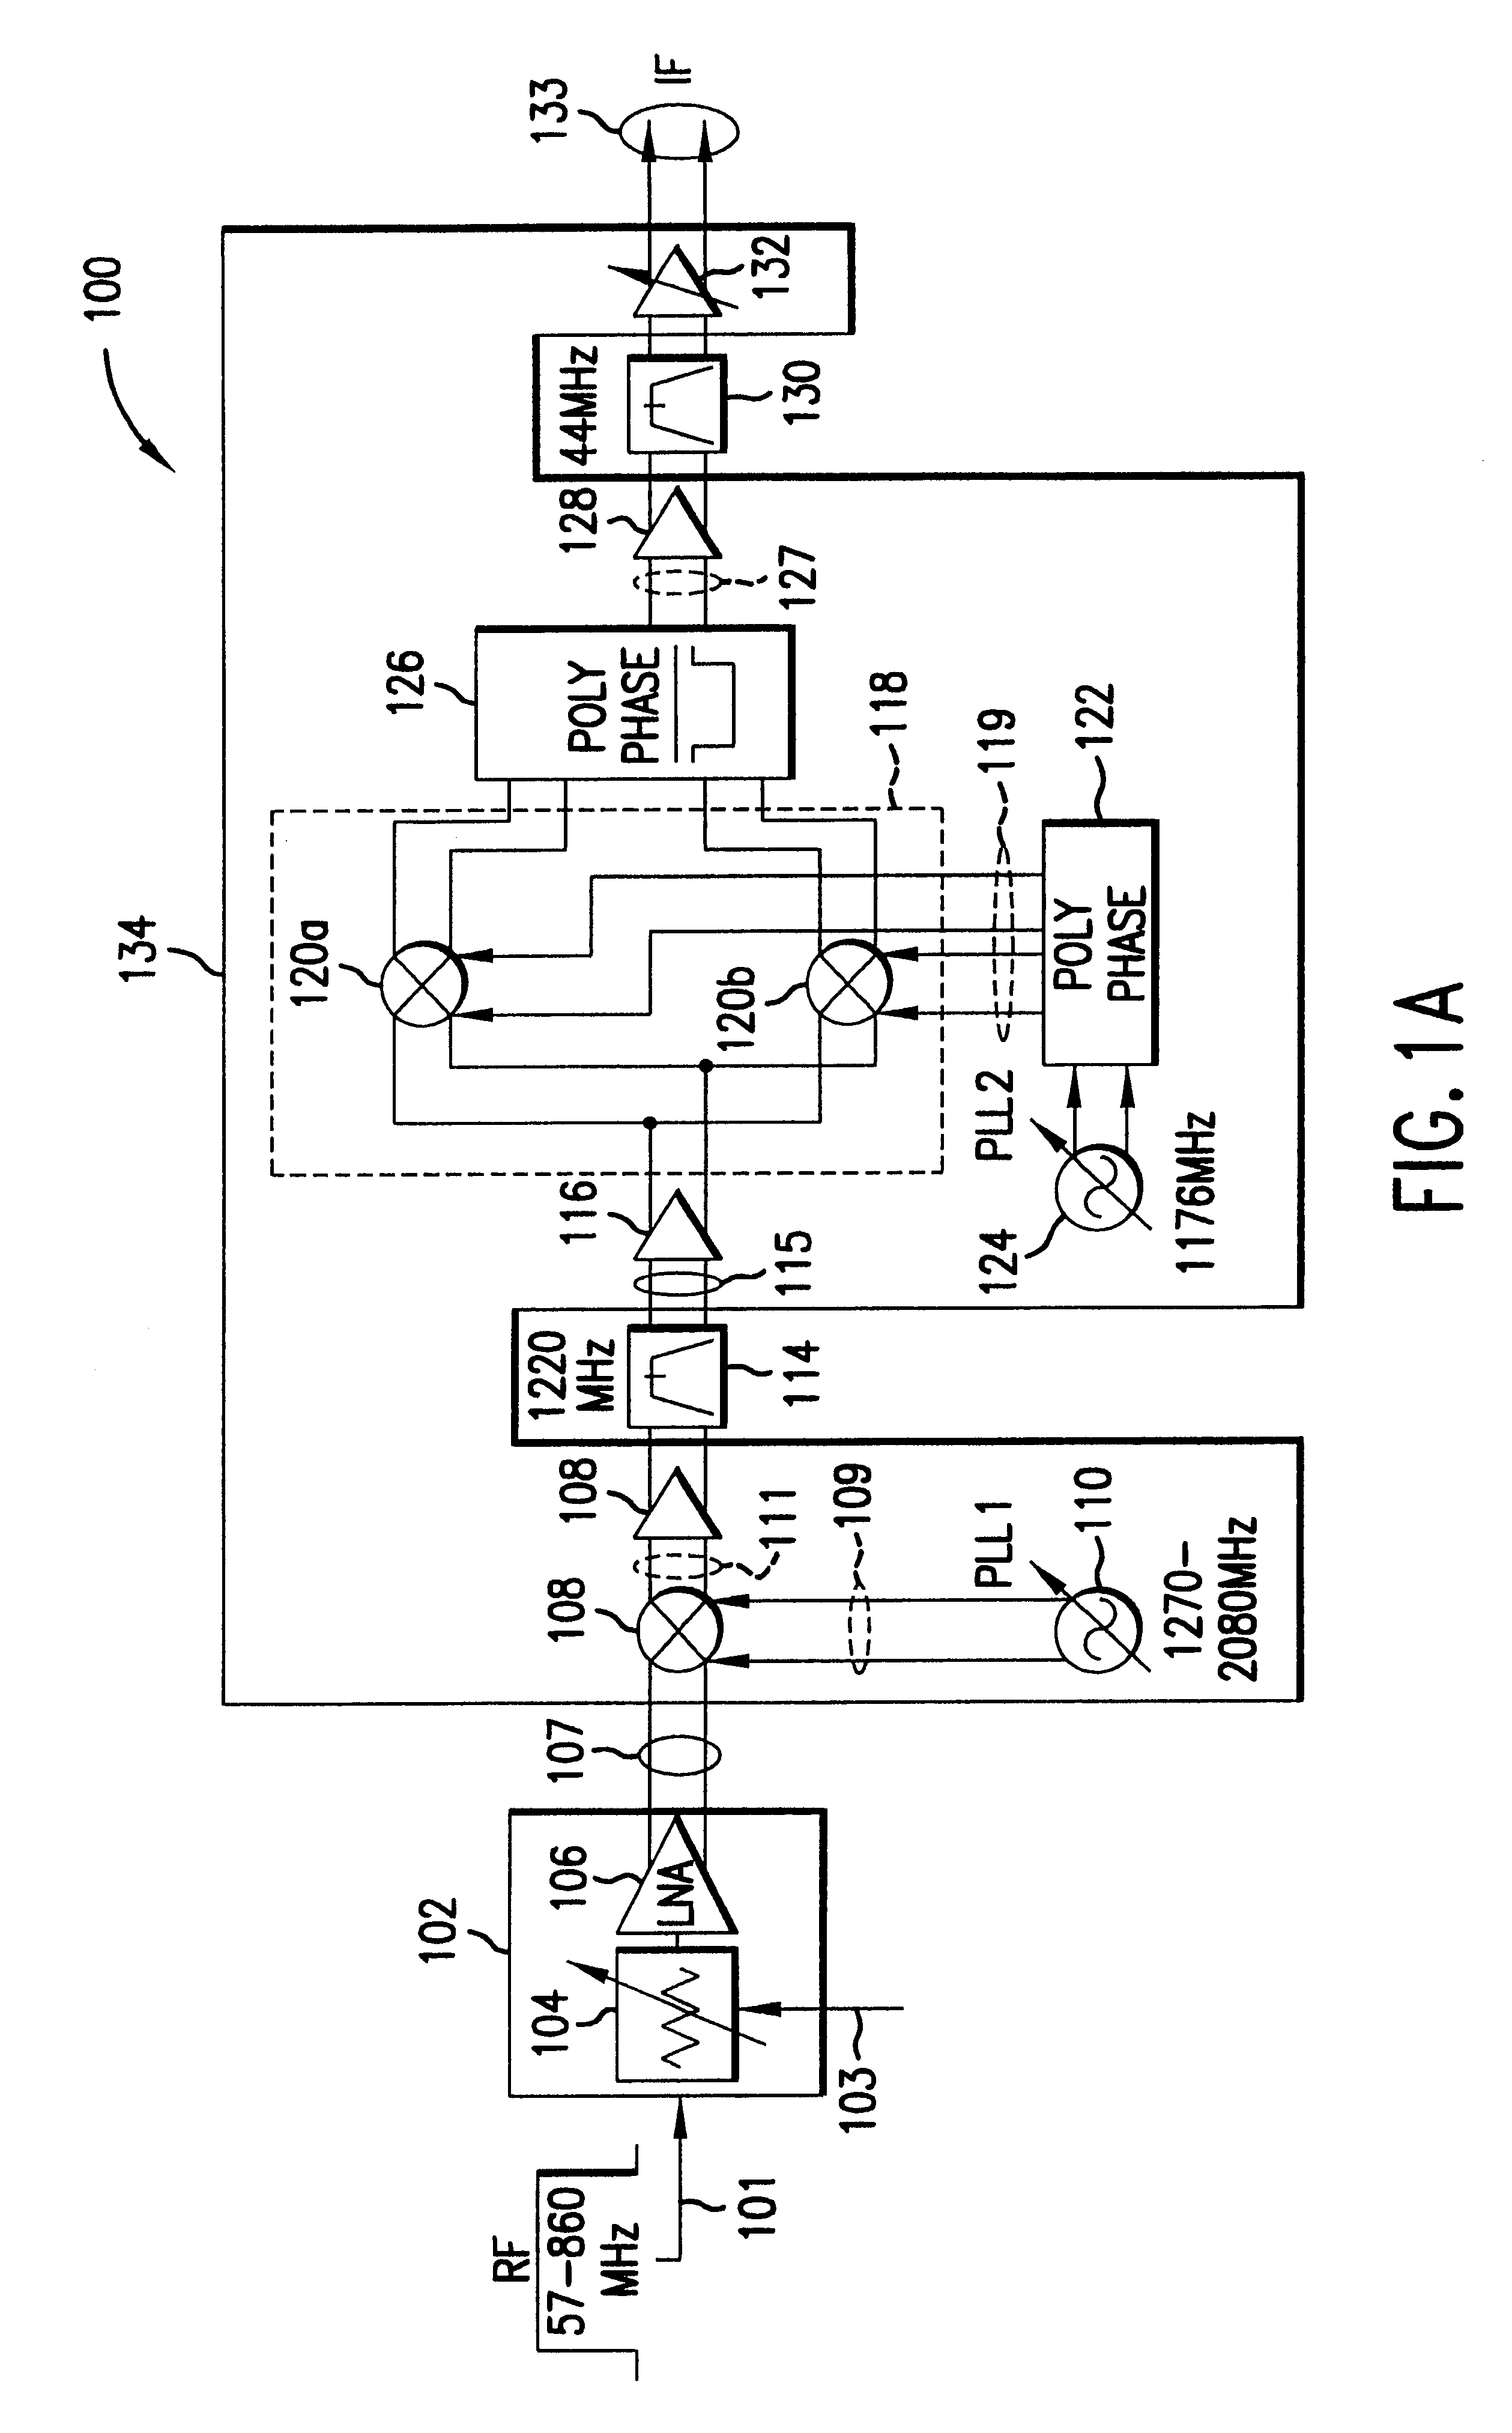 Apparatus and method for phase lock loop gain control using unit current sources